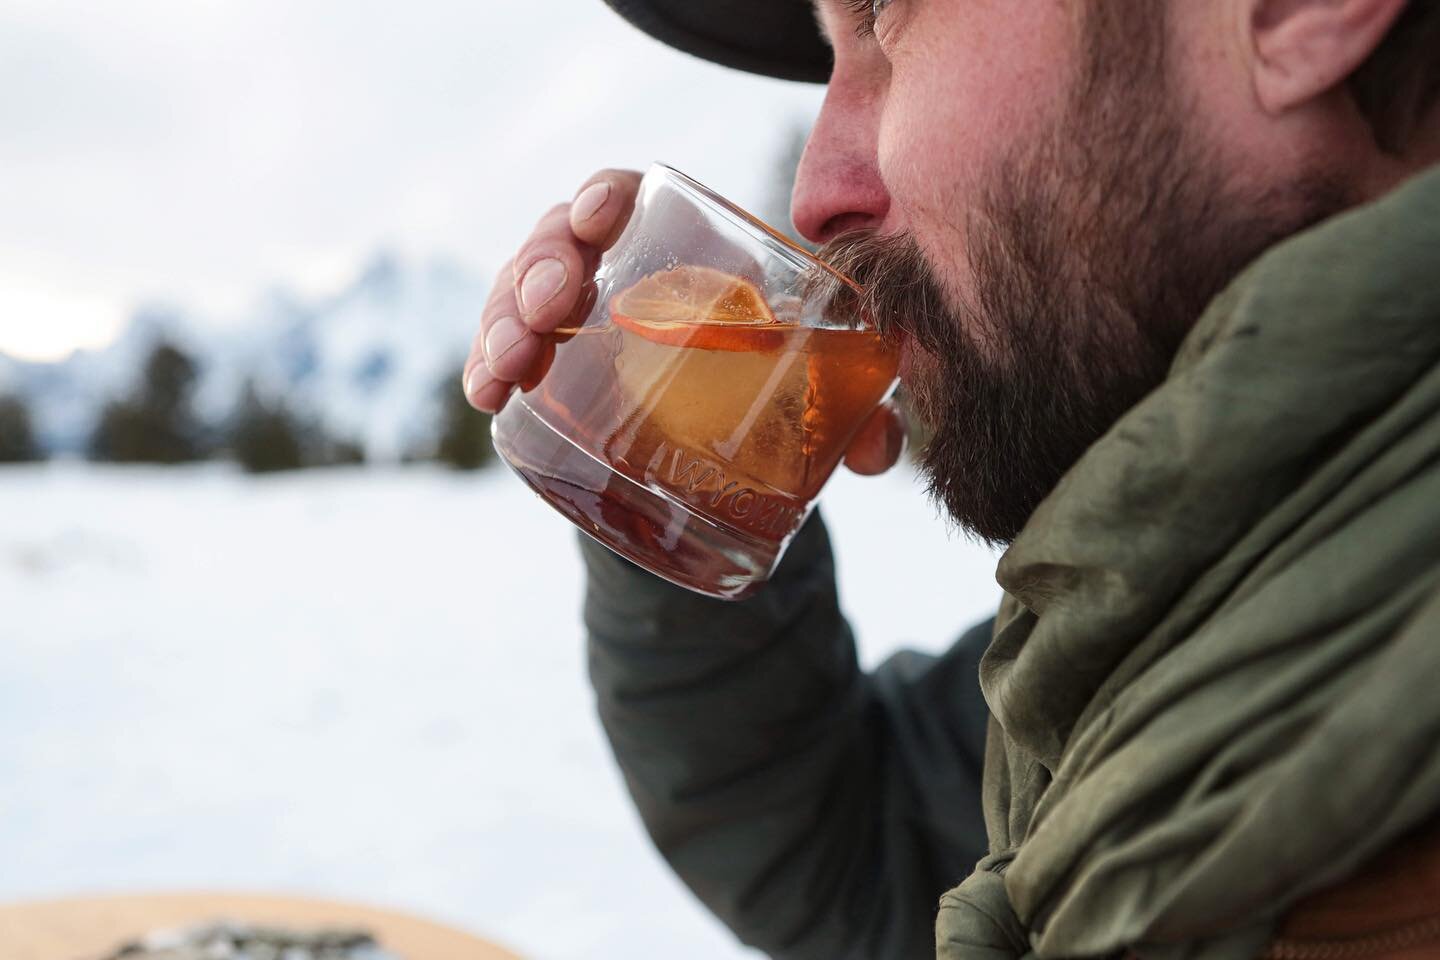 Whiskey. It pairs best with Wyoming. Get out on a ride with JH Outfitting Company and give it a try yourself! Link in bio for more information.

www.jhoutfittingcompany.com 

📸 credit: @saraligon 

#whiskey #wyoming #bourbon #oldfashioned #cocktail 